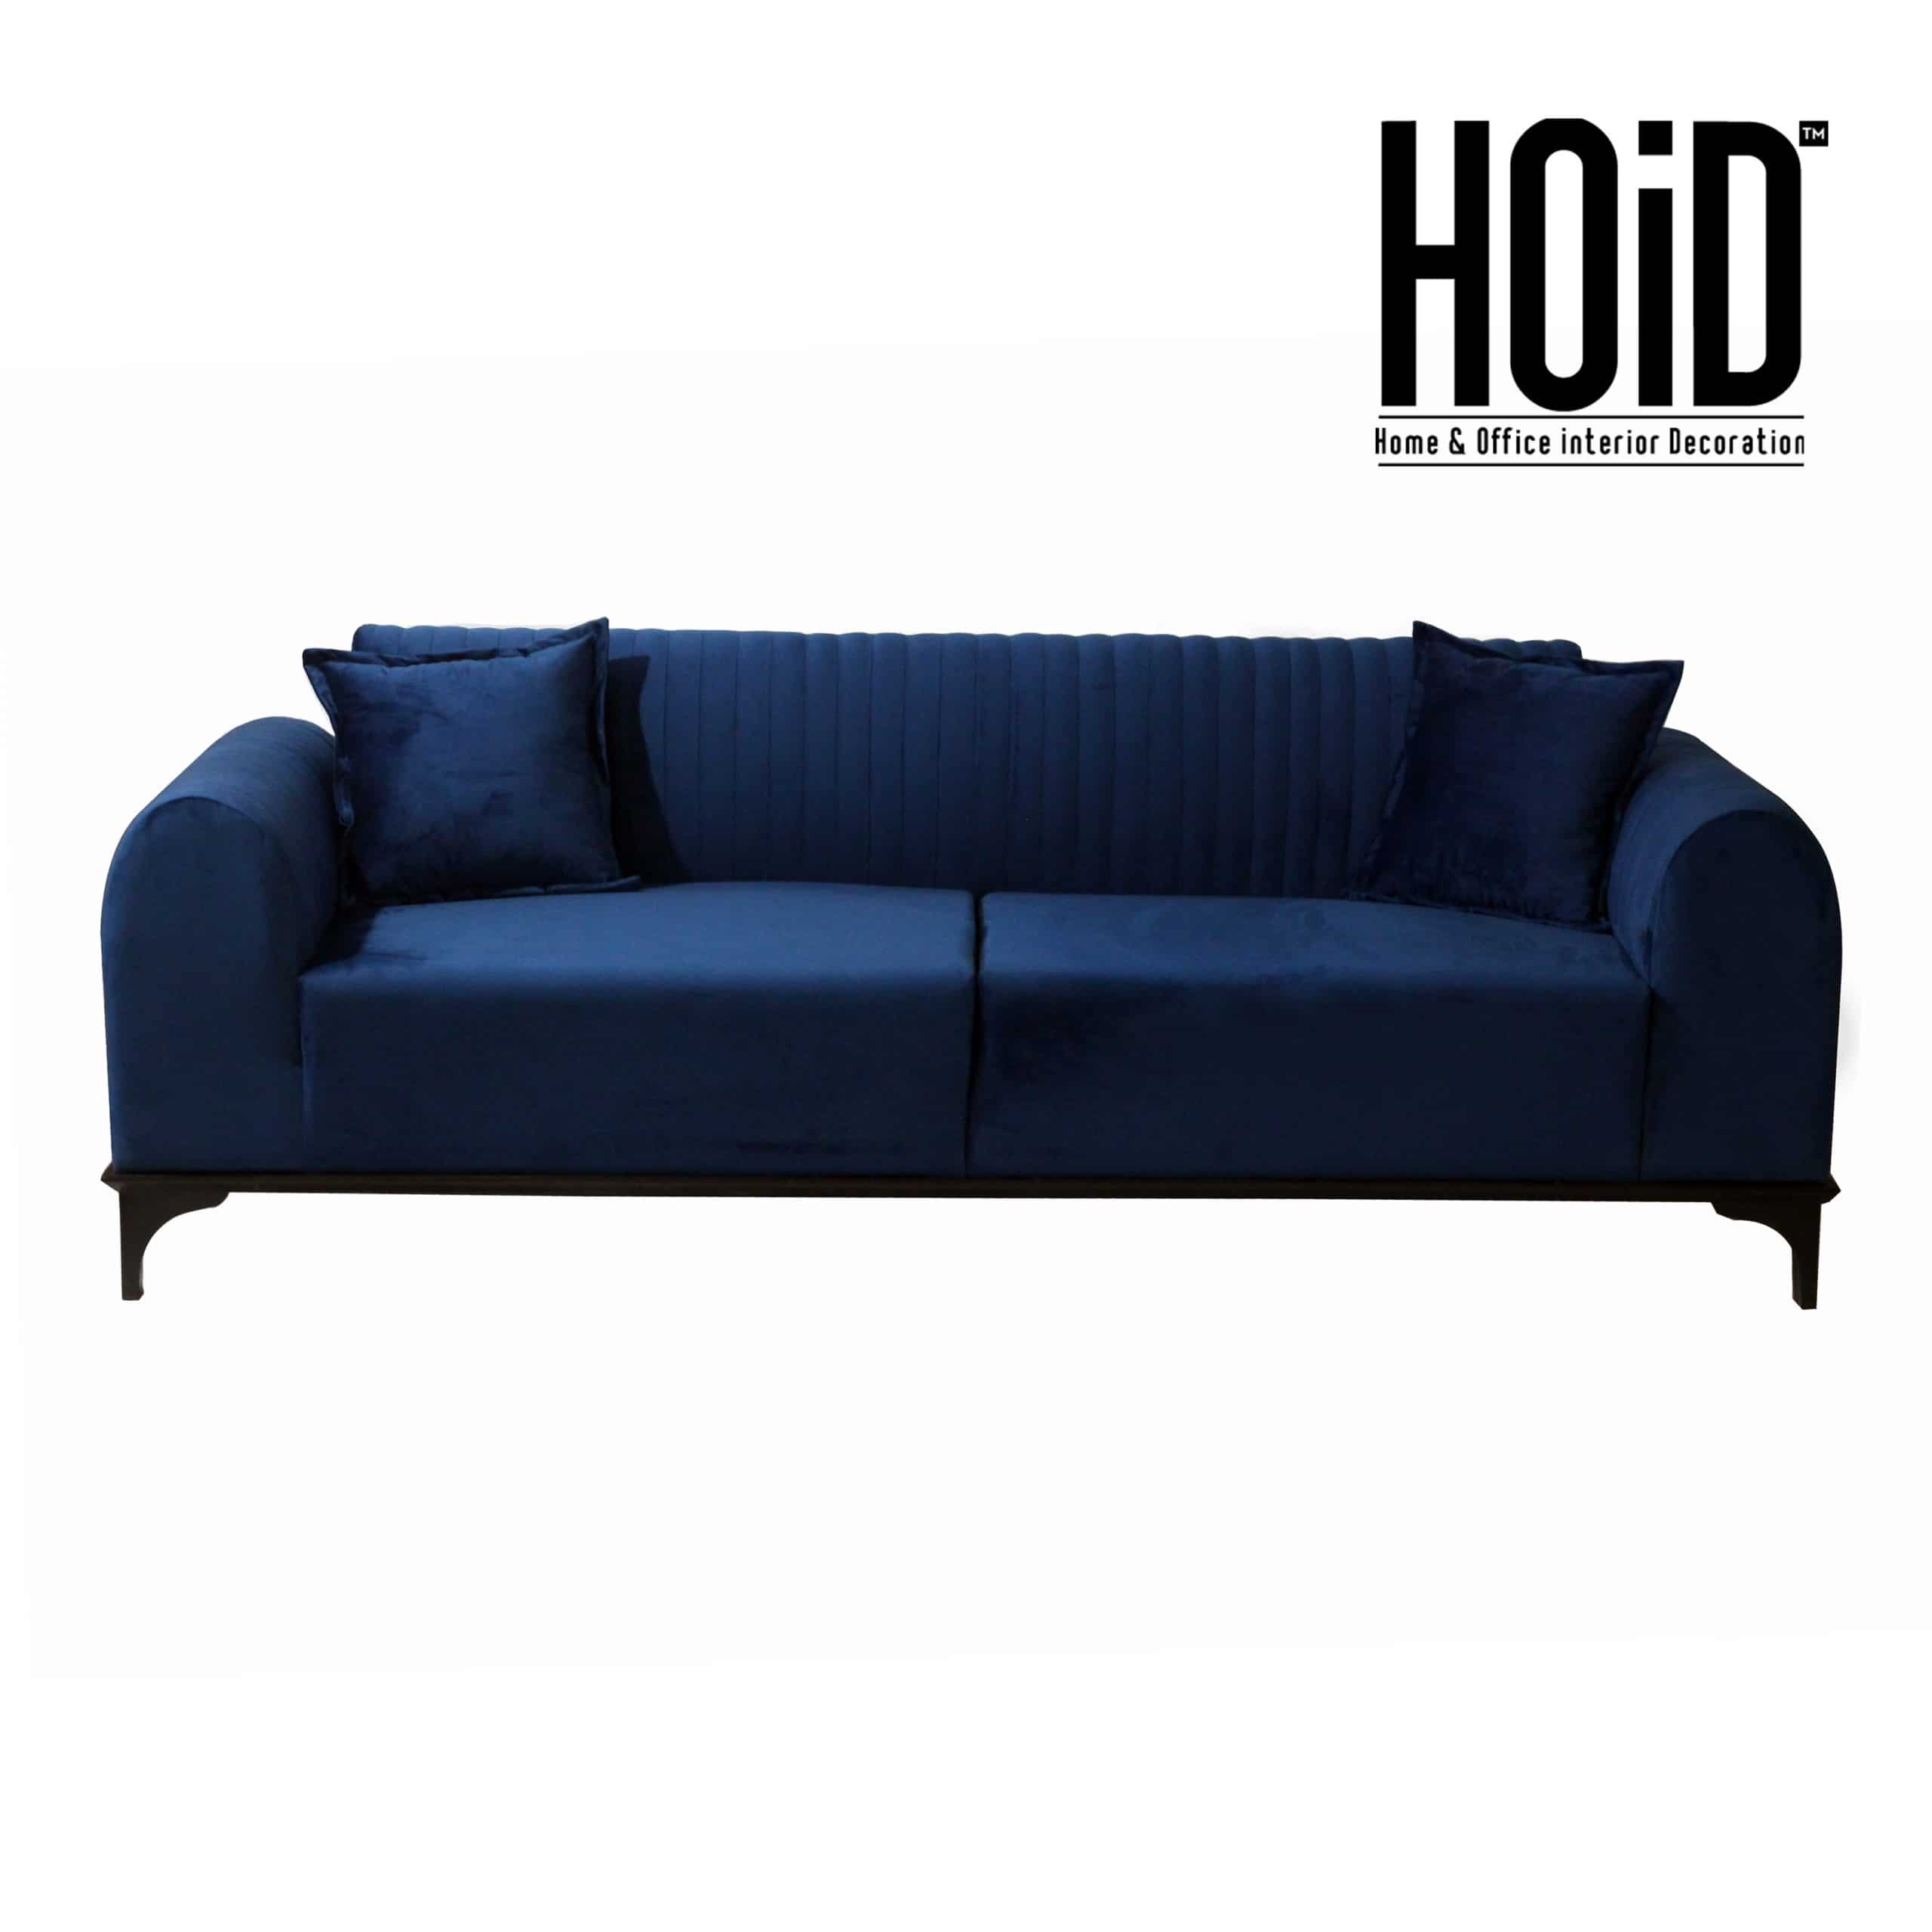 bumby-3-seater-sofa-in-blue-scaled-2.jpg